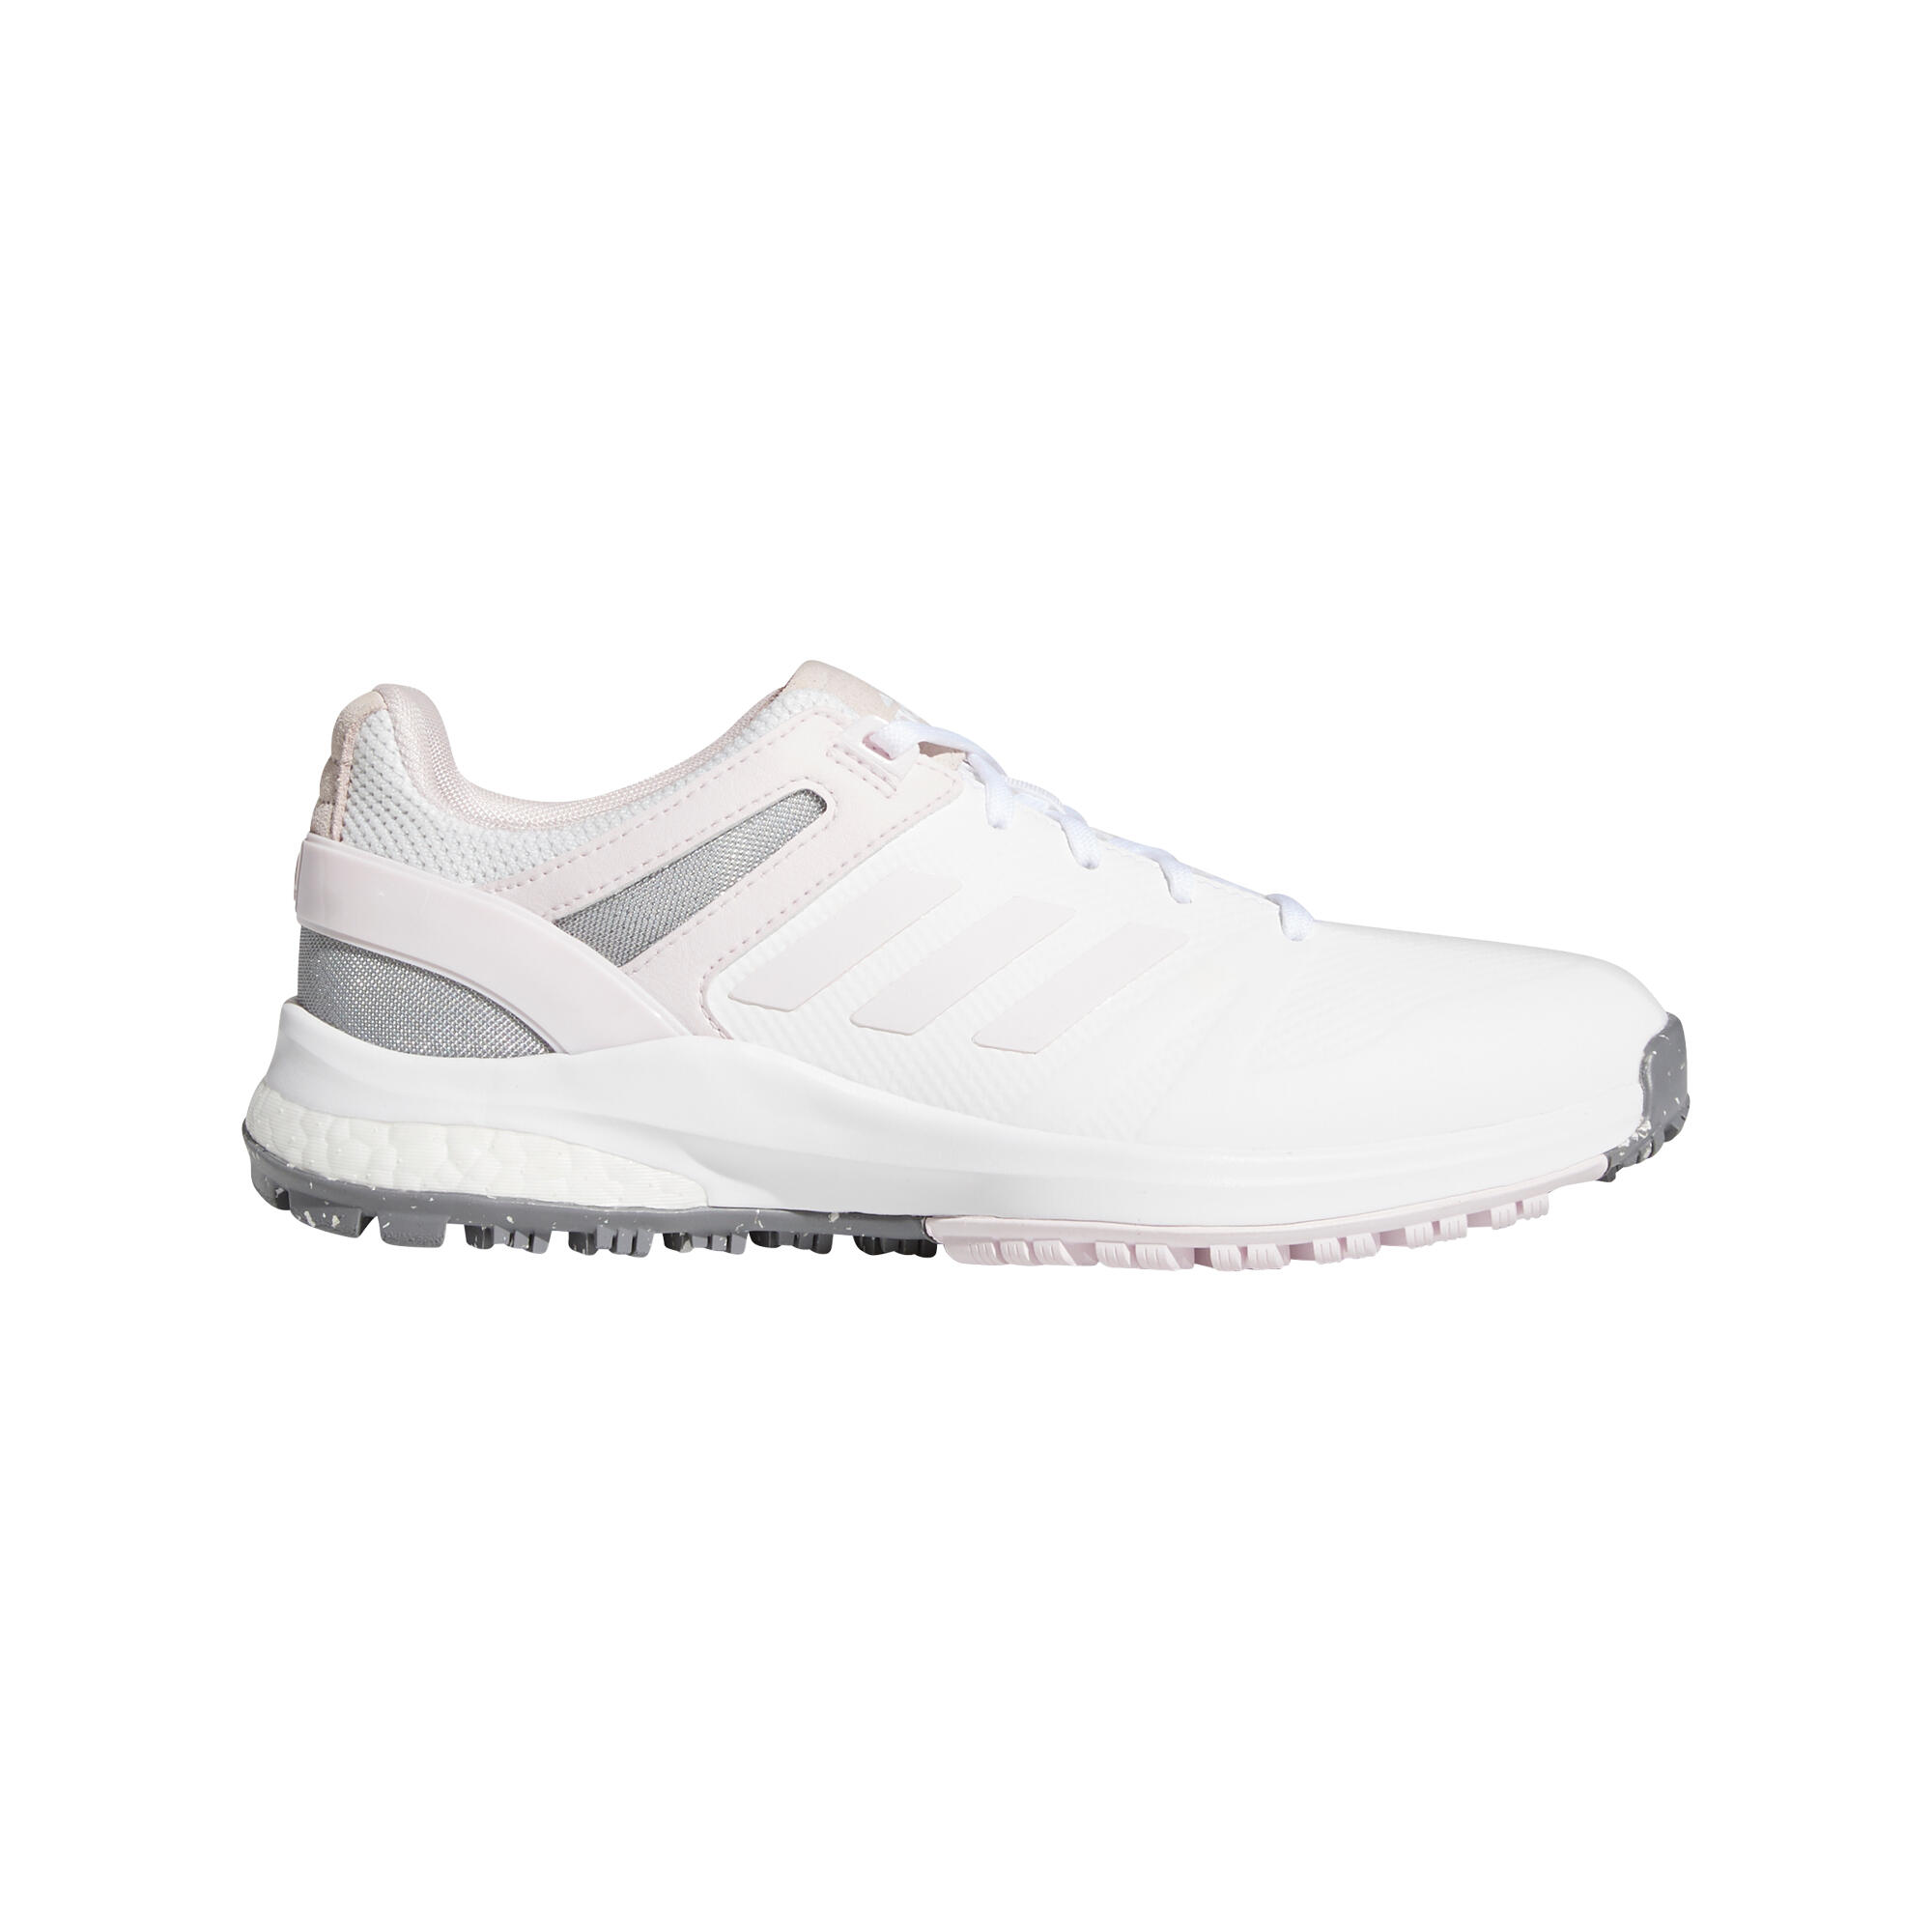 adidas 2022 EQT Spikeless Golf Shoes - ftwr white 1/5